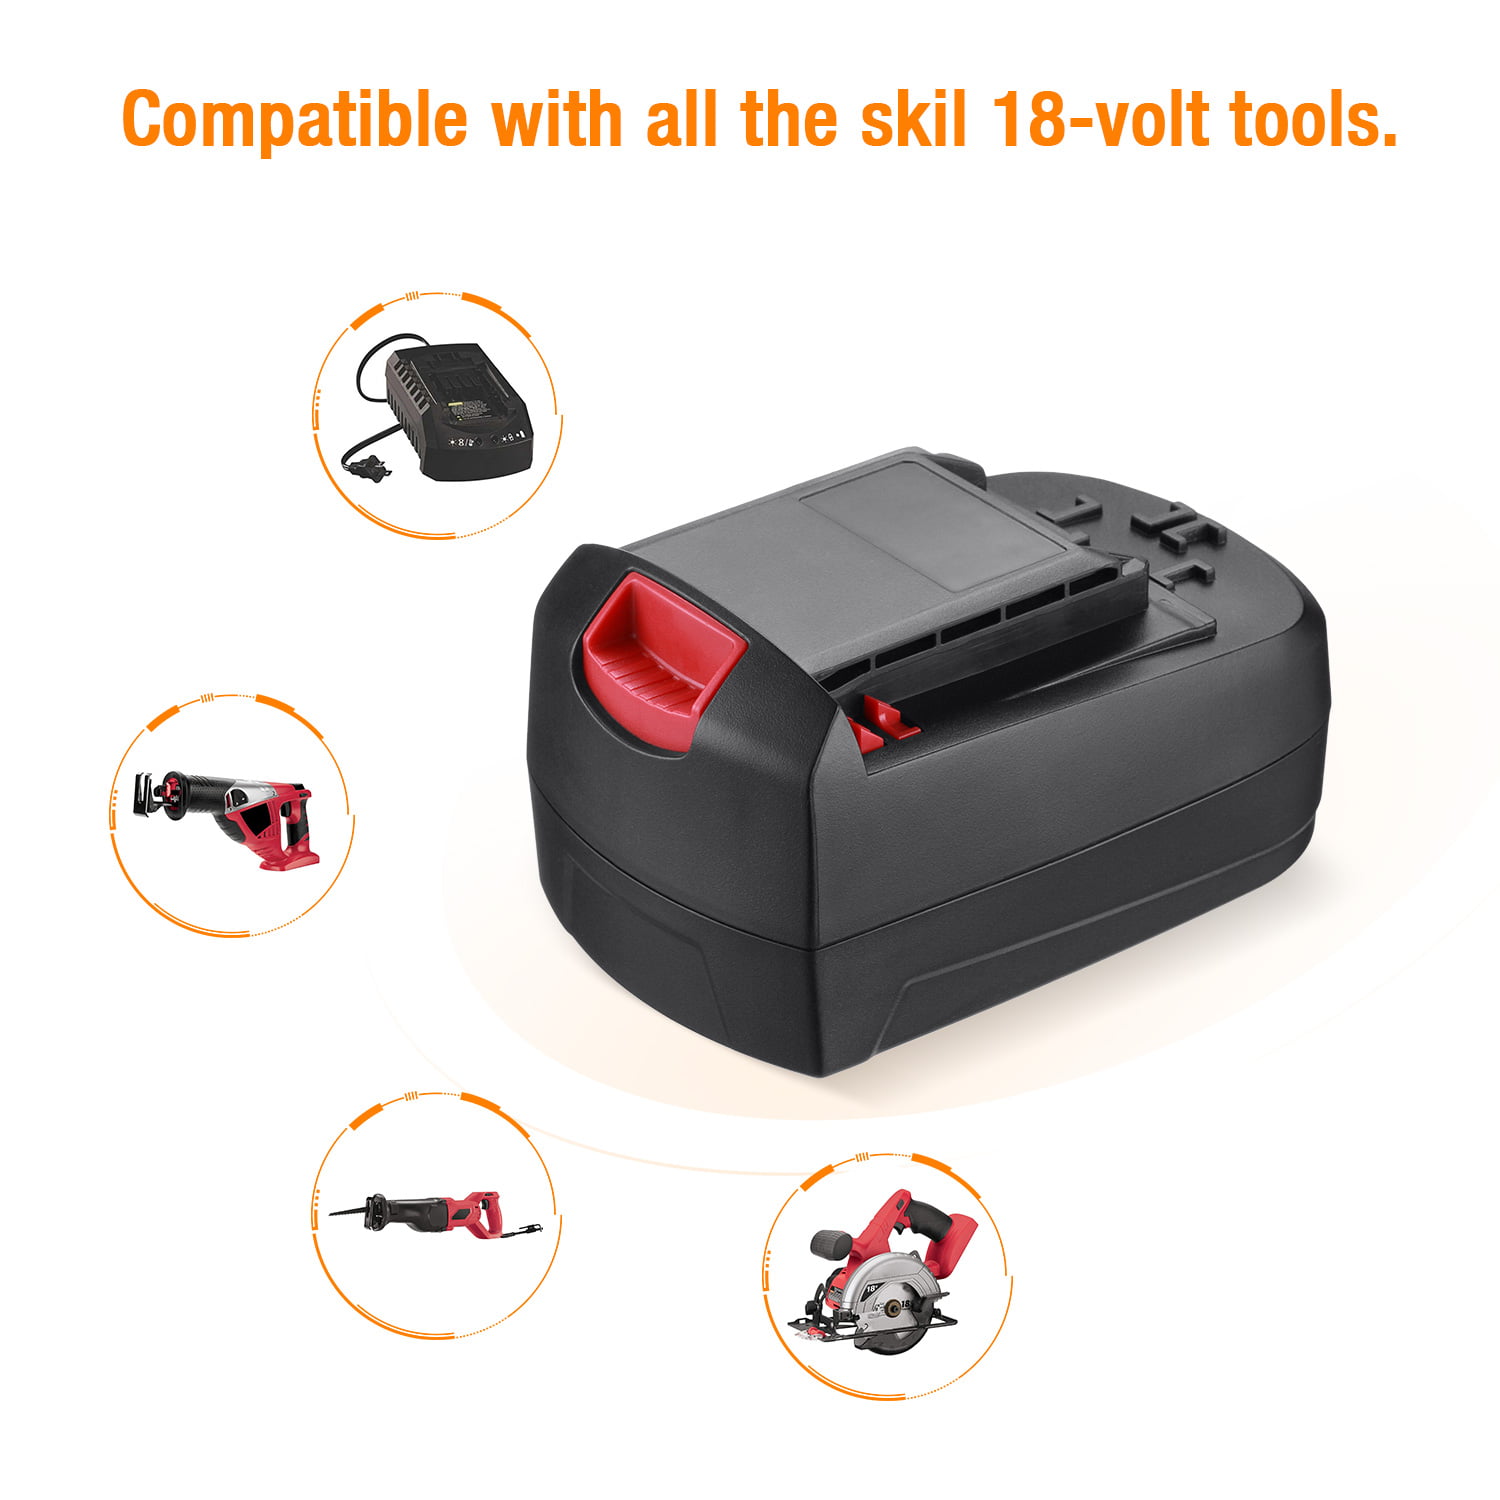 Details about   Biswaye 2Pack 18V Battery SB18C SB18A SB18B Replacement For Skil Cordless Tools 